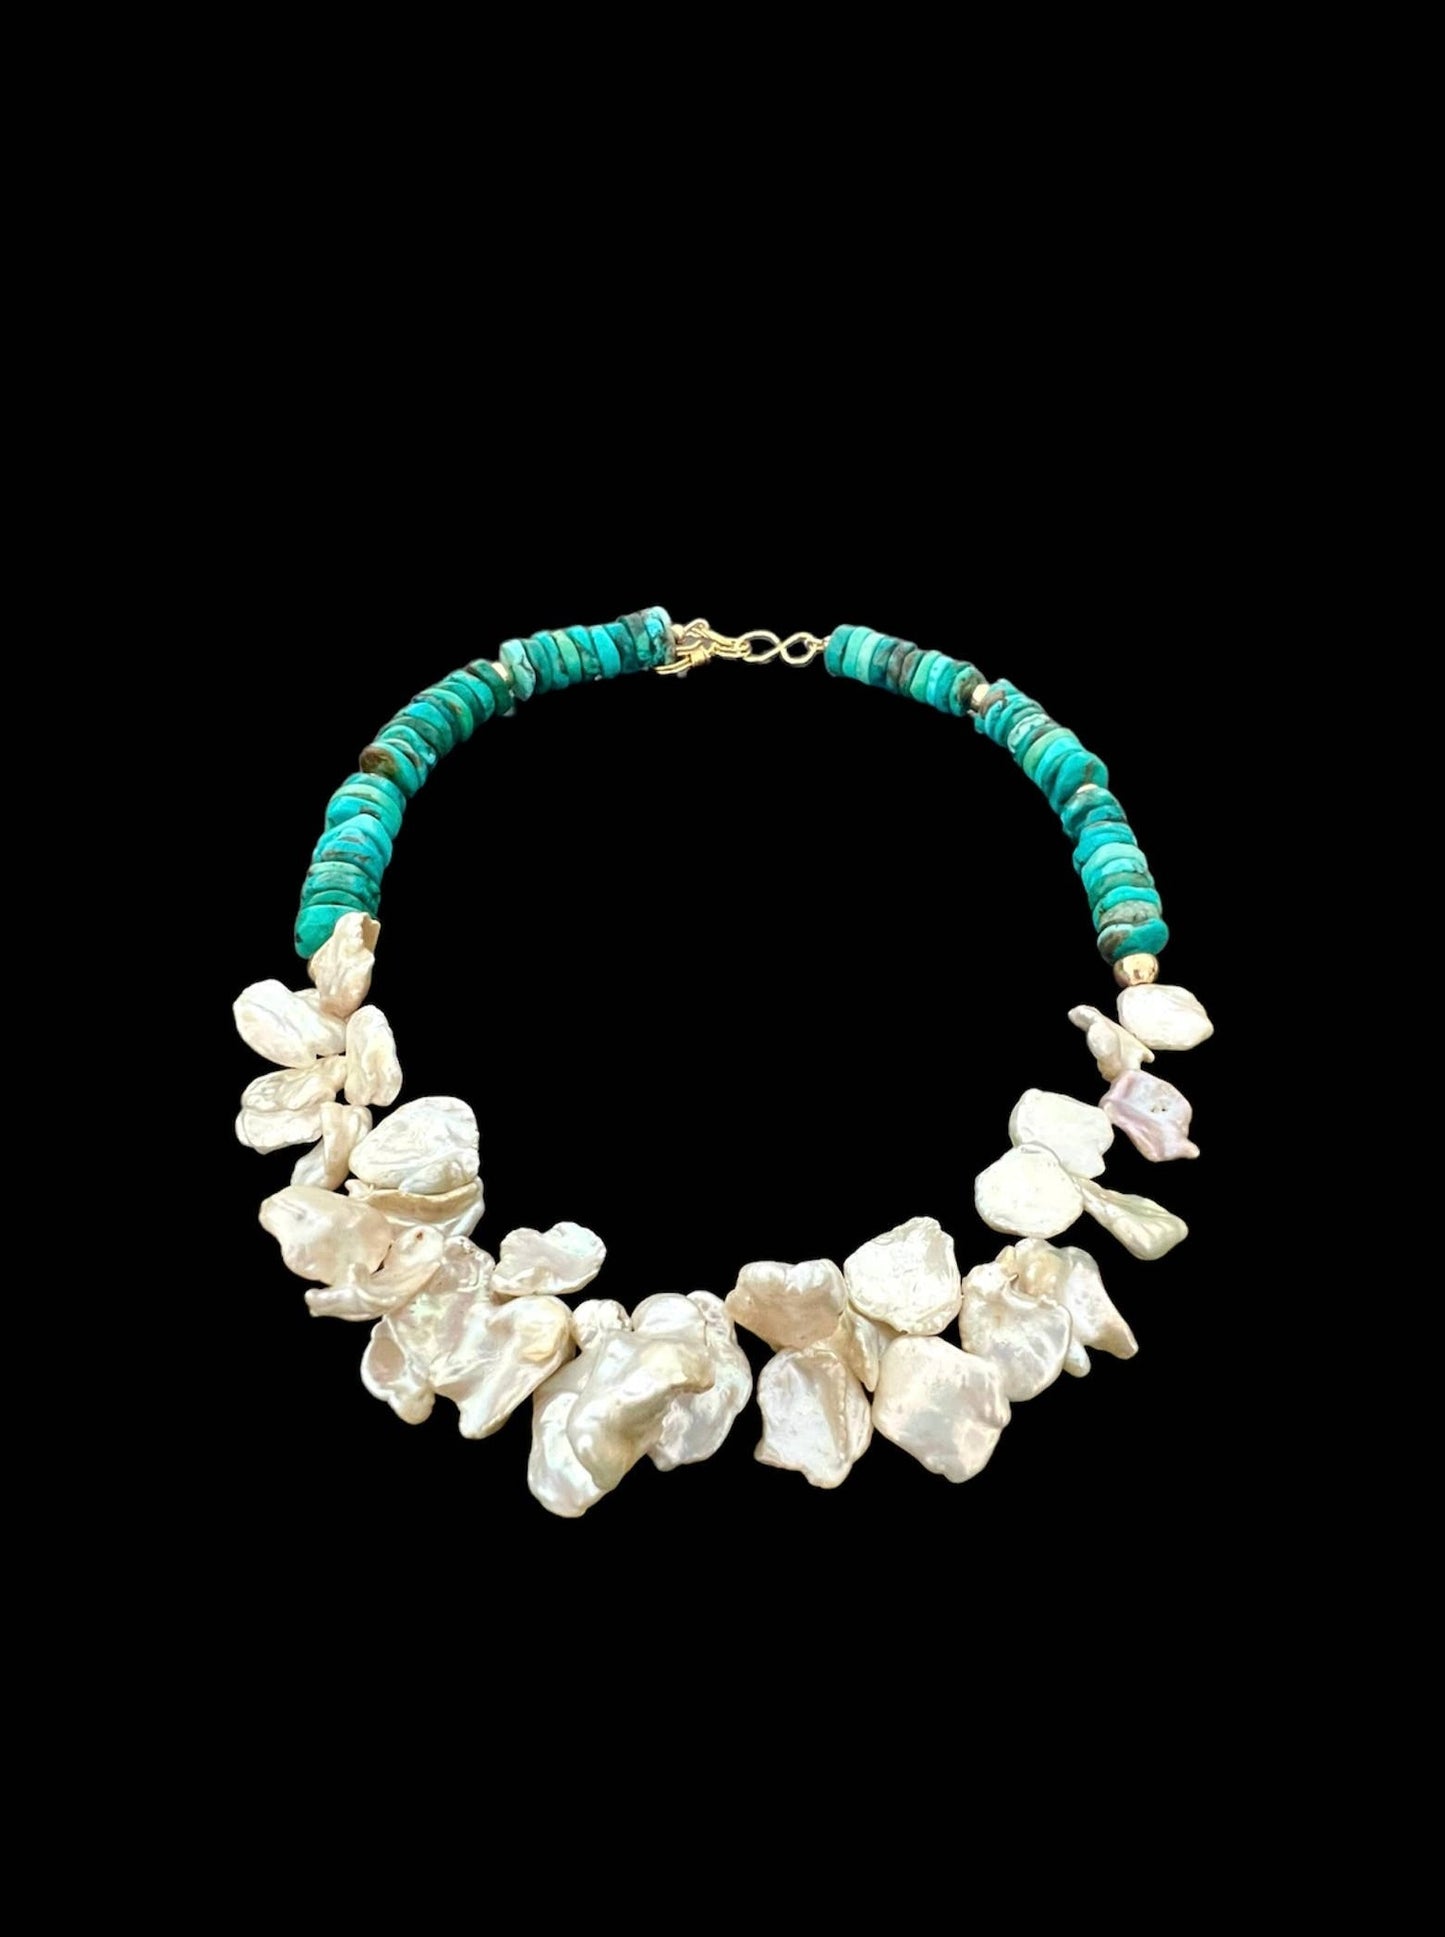 Diana Wingert Jewelry- Turquoise and Keshi pearl necklace